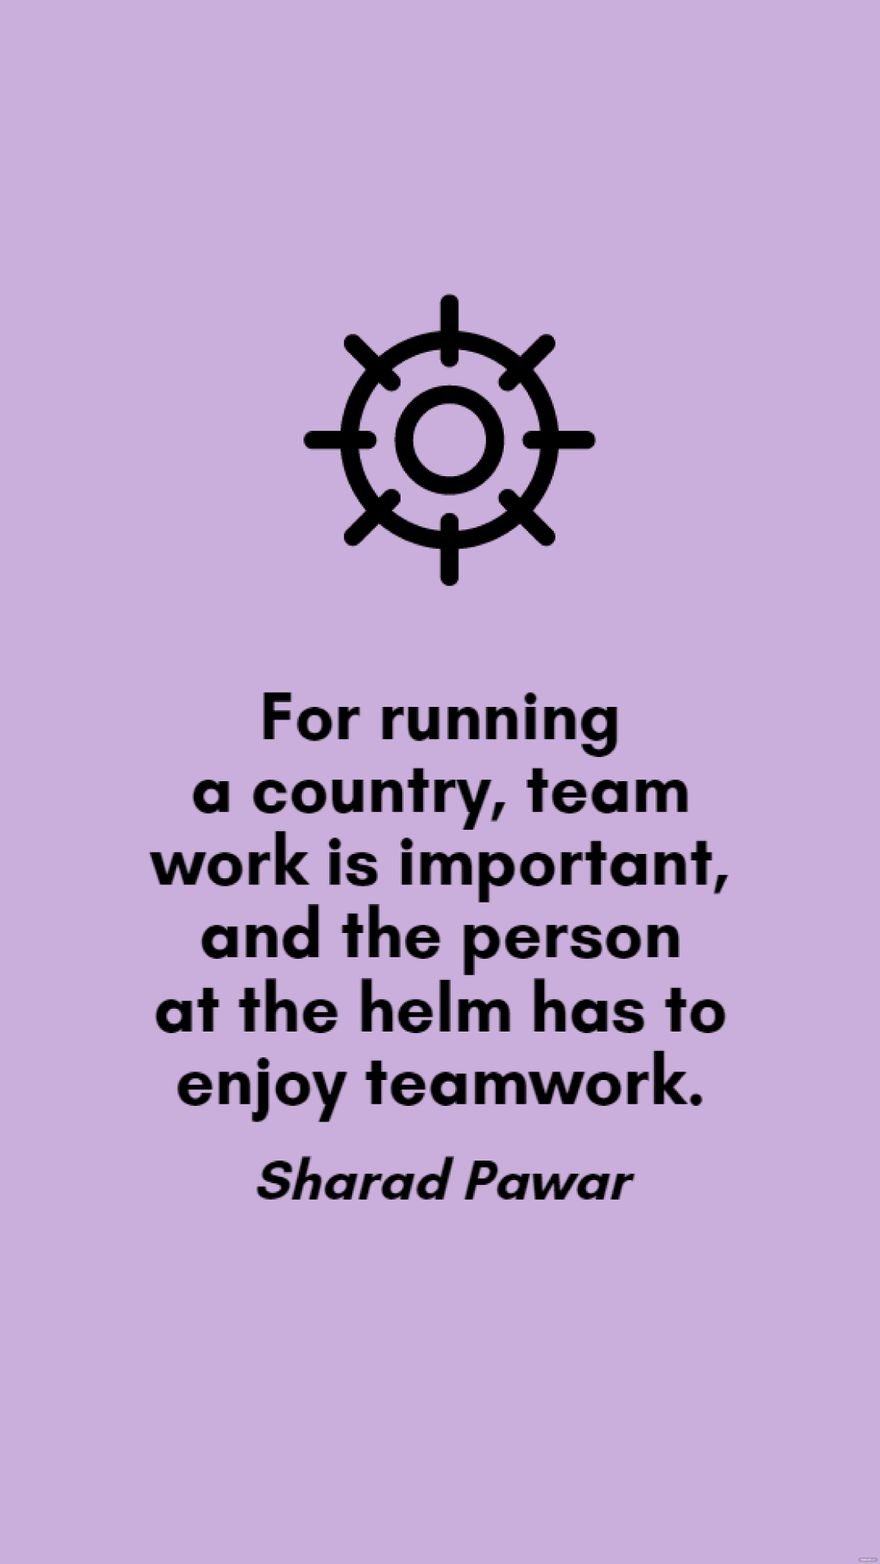 Free Sharad Pawar - For running a country, team work is important, and the person at the helm has to enjoy teamwork. in JPG